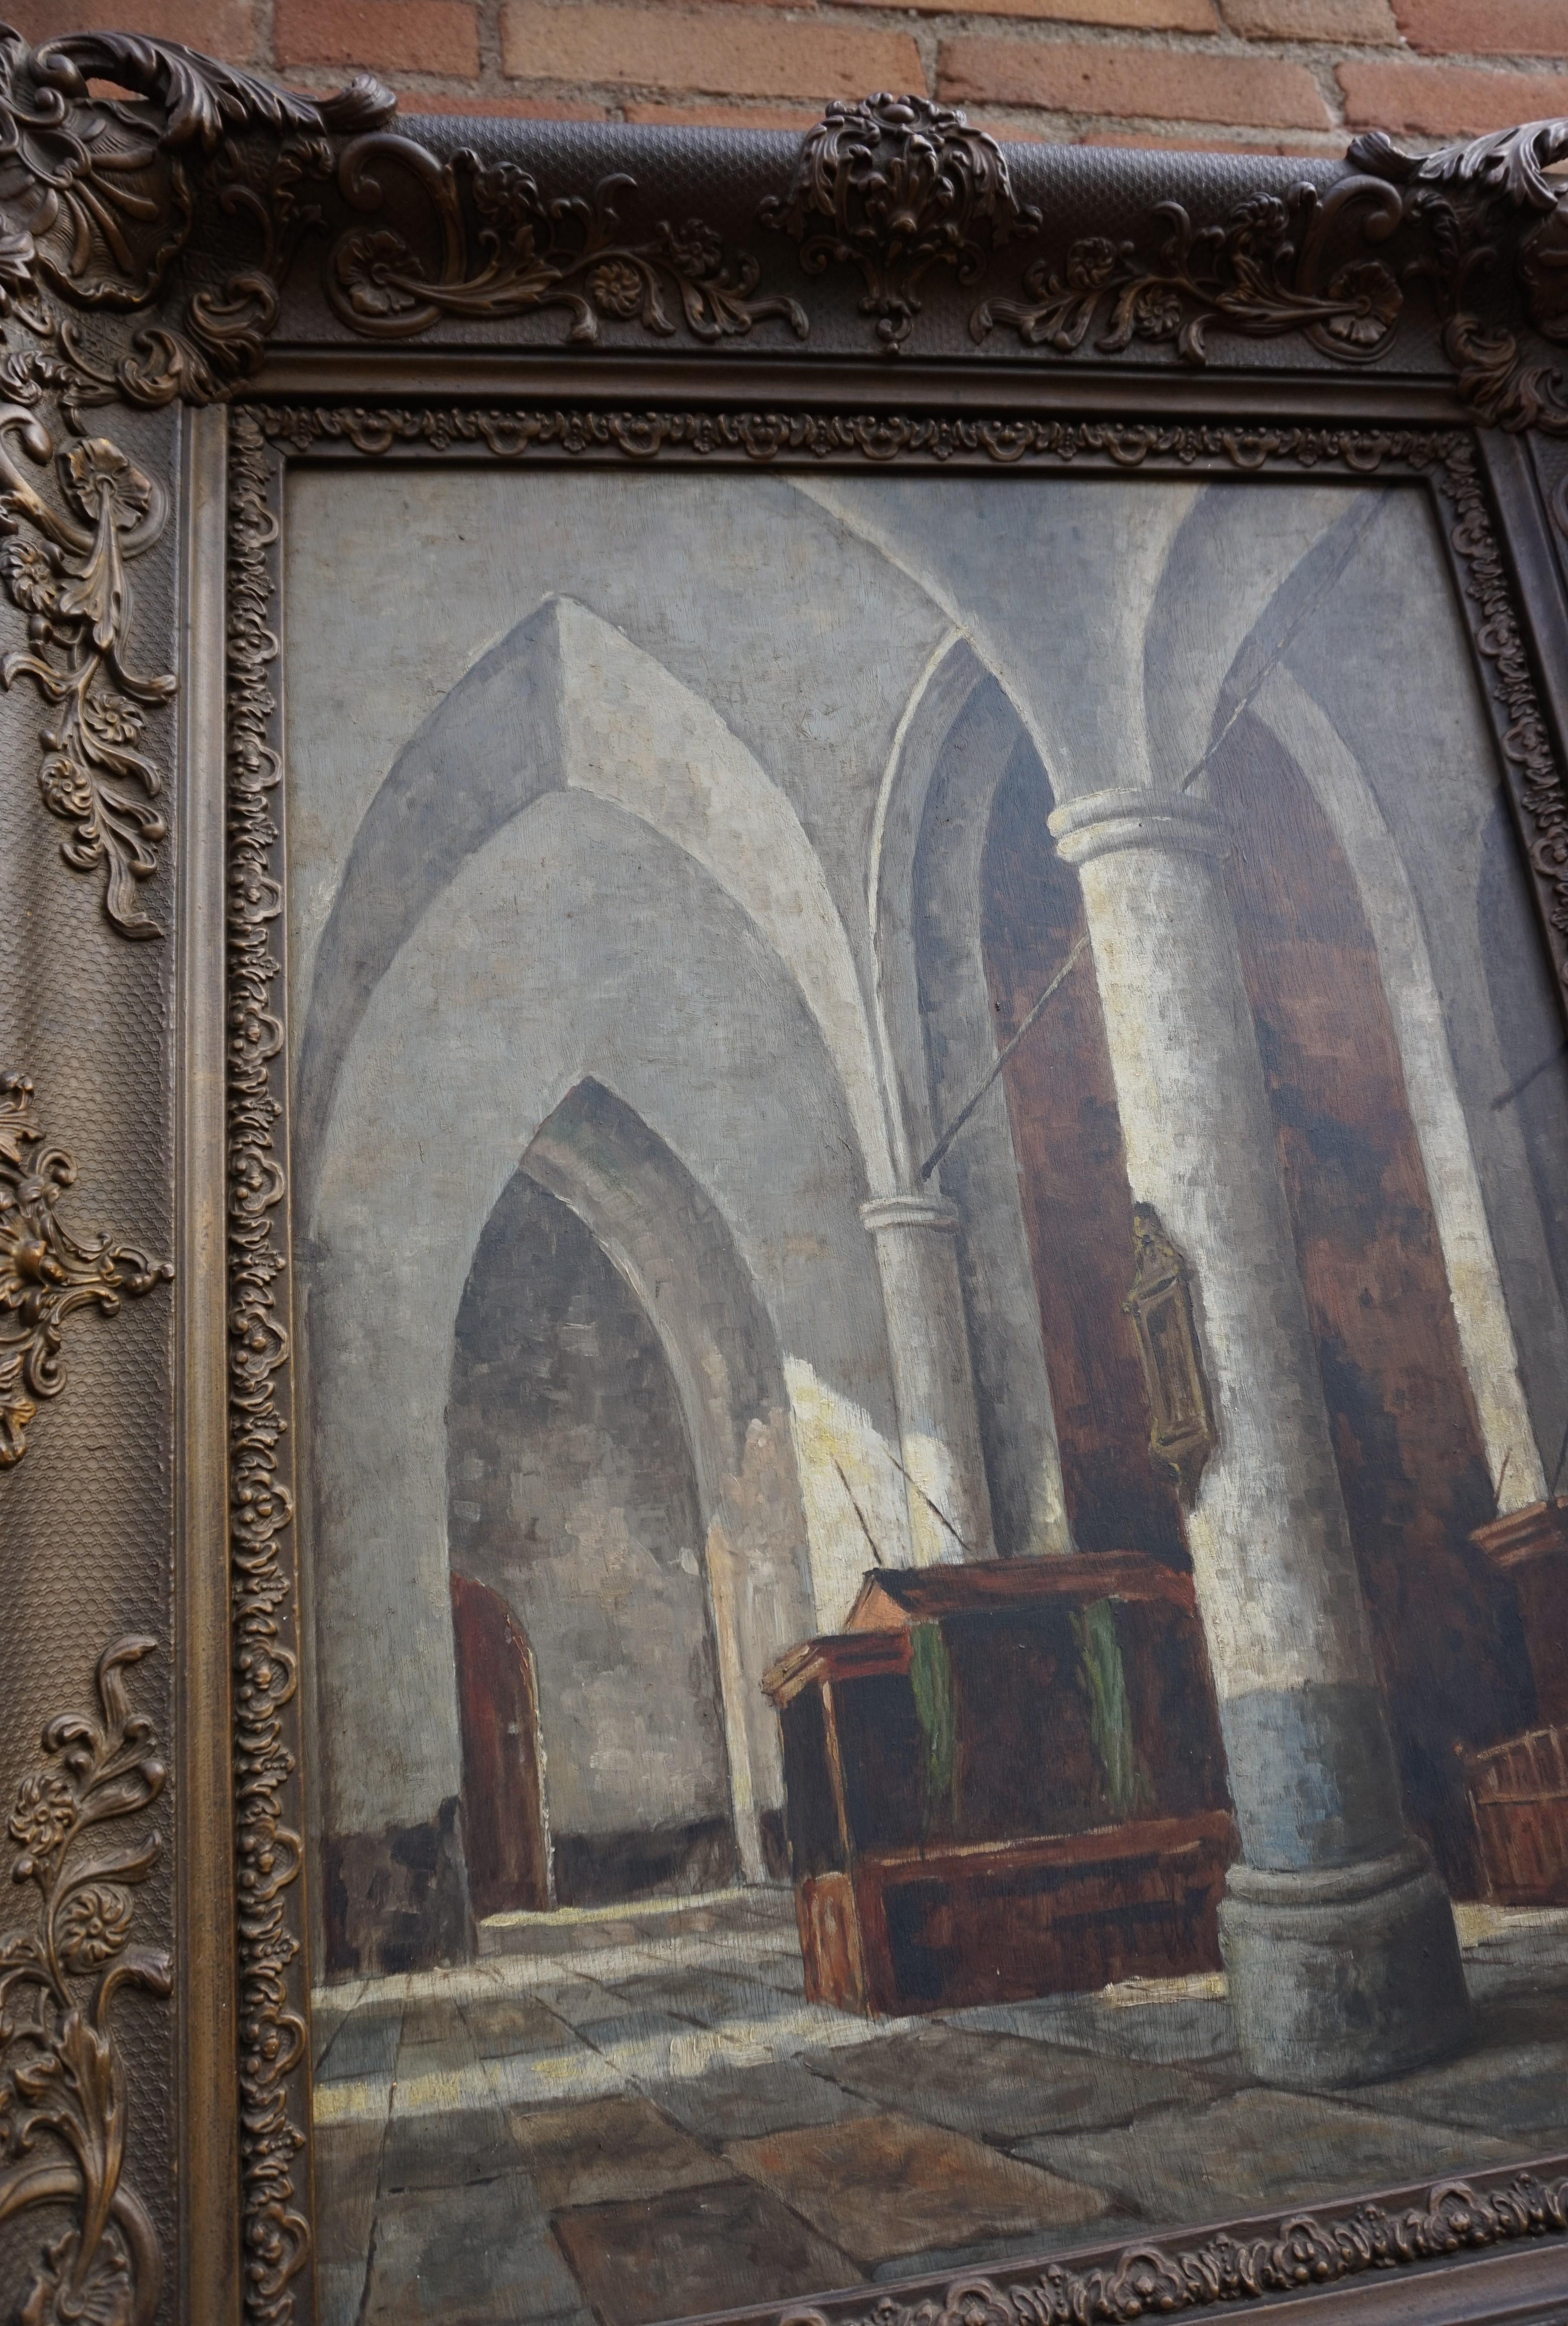 Antique and Unique Gothic Church Interior Painting in a Stunning Mid-1800s Frame 3